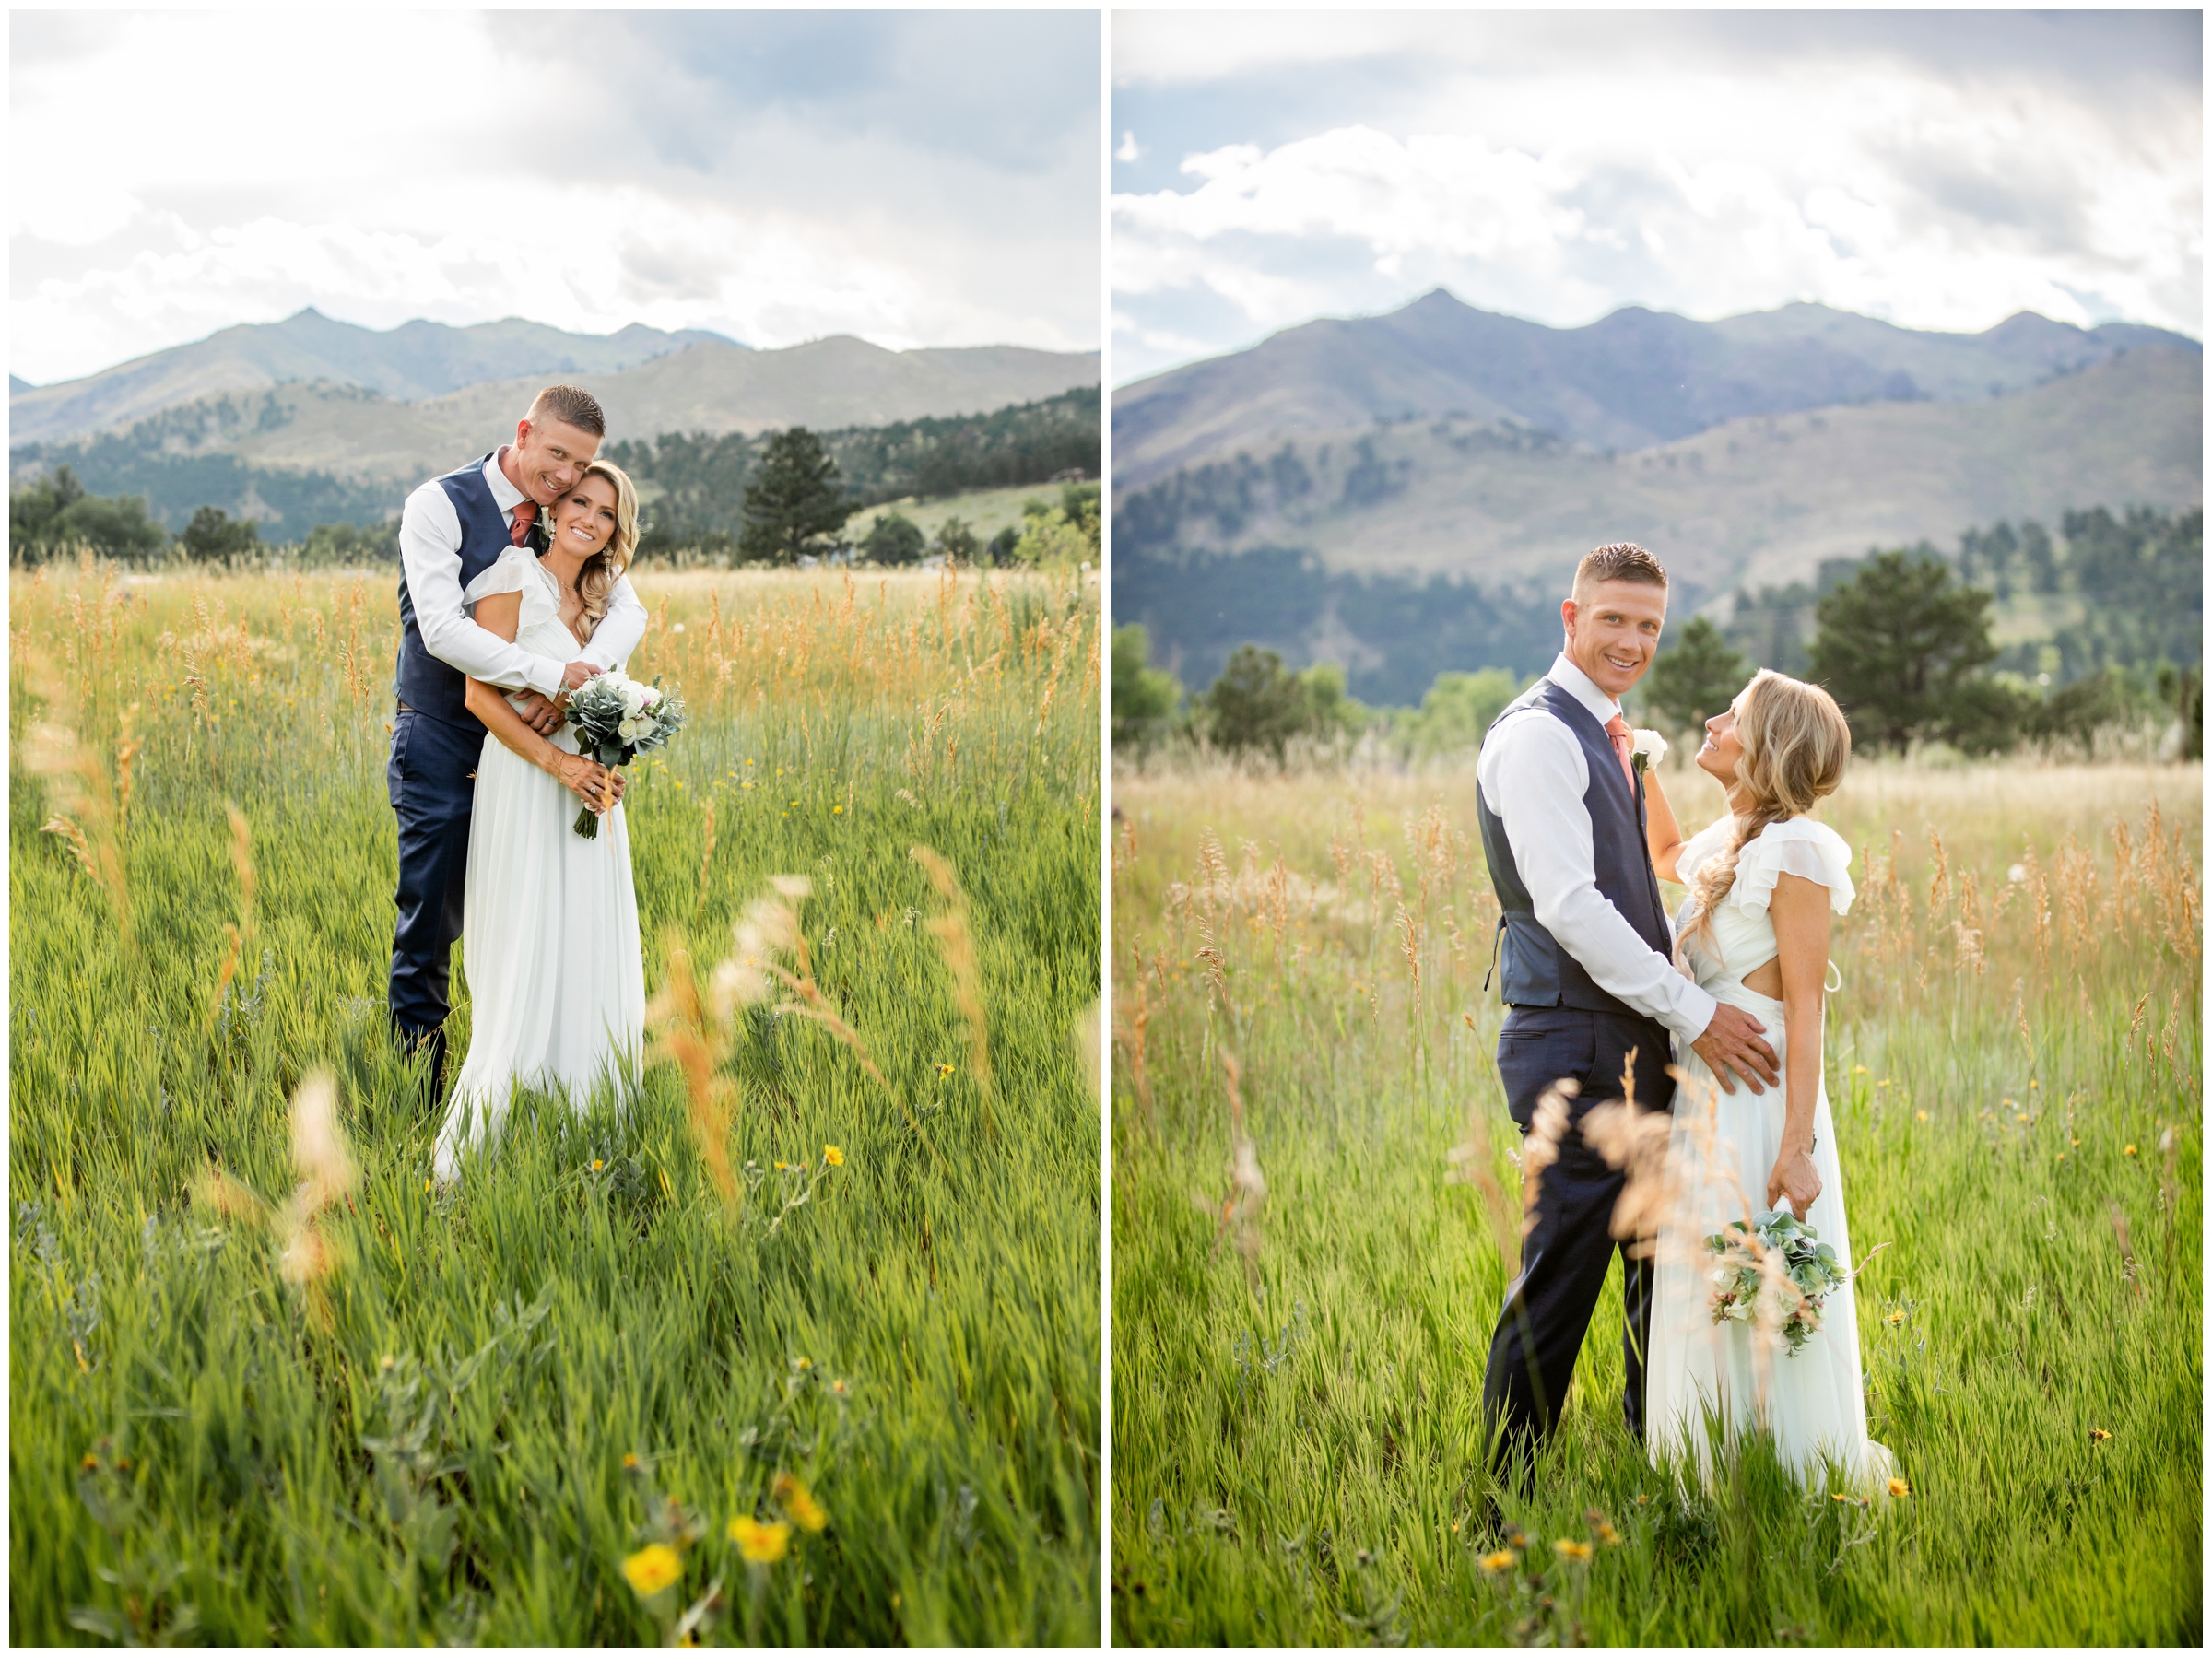 couple embracing in mountain field during Boulder wedding portraits at the Greenbriar Inn